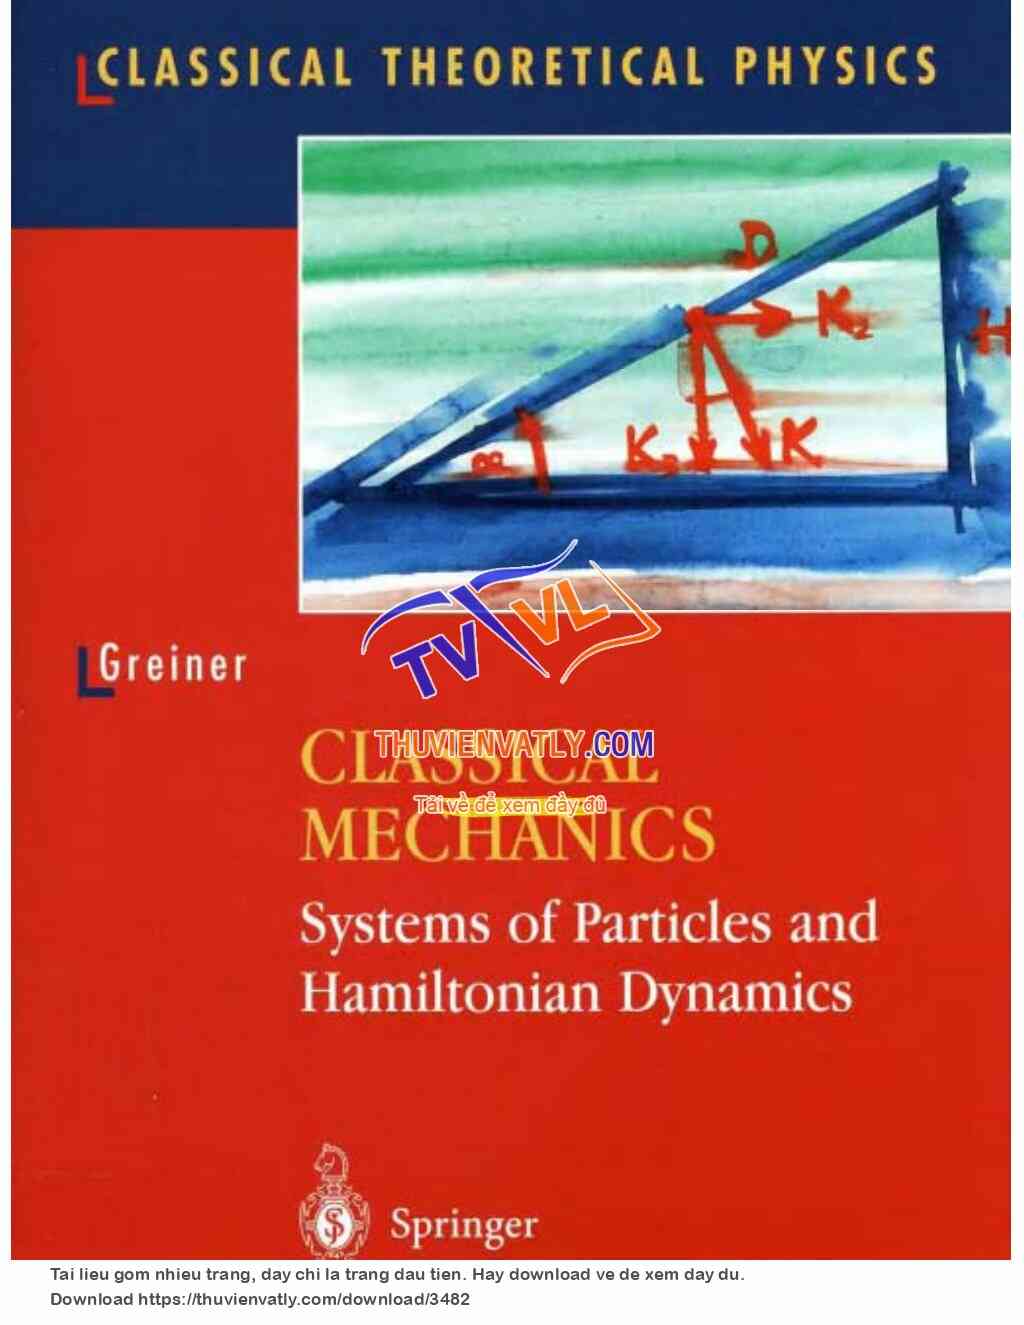 Greiner - Classical Mechanics, Systems of Particles and Hamiltonian Dynamics